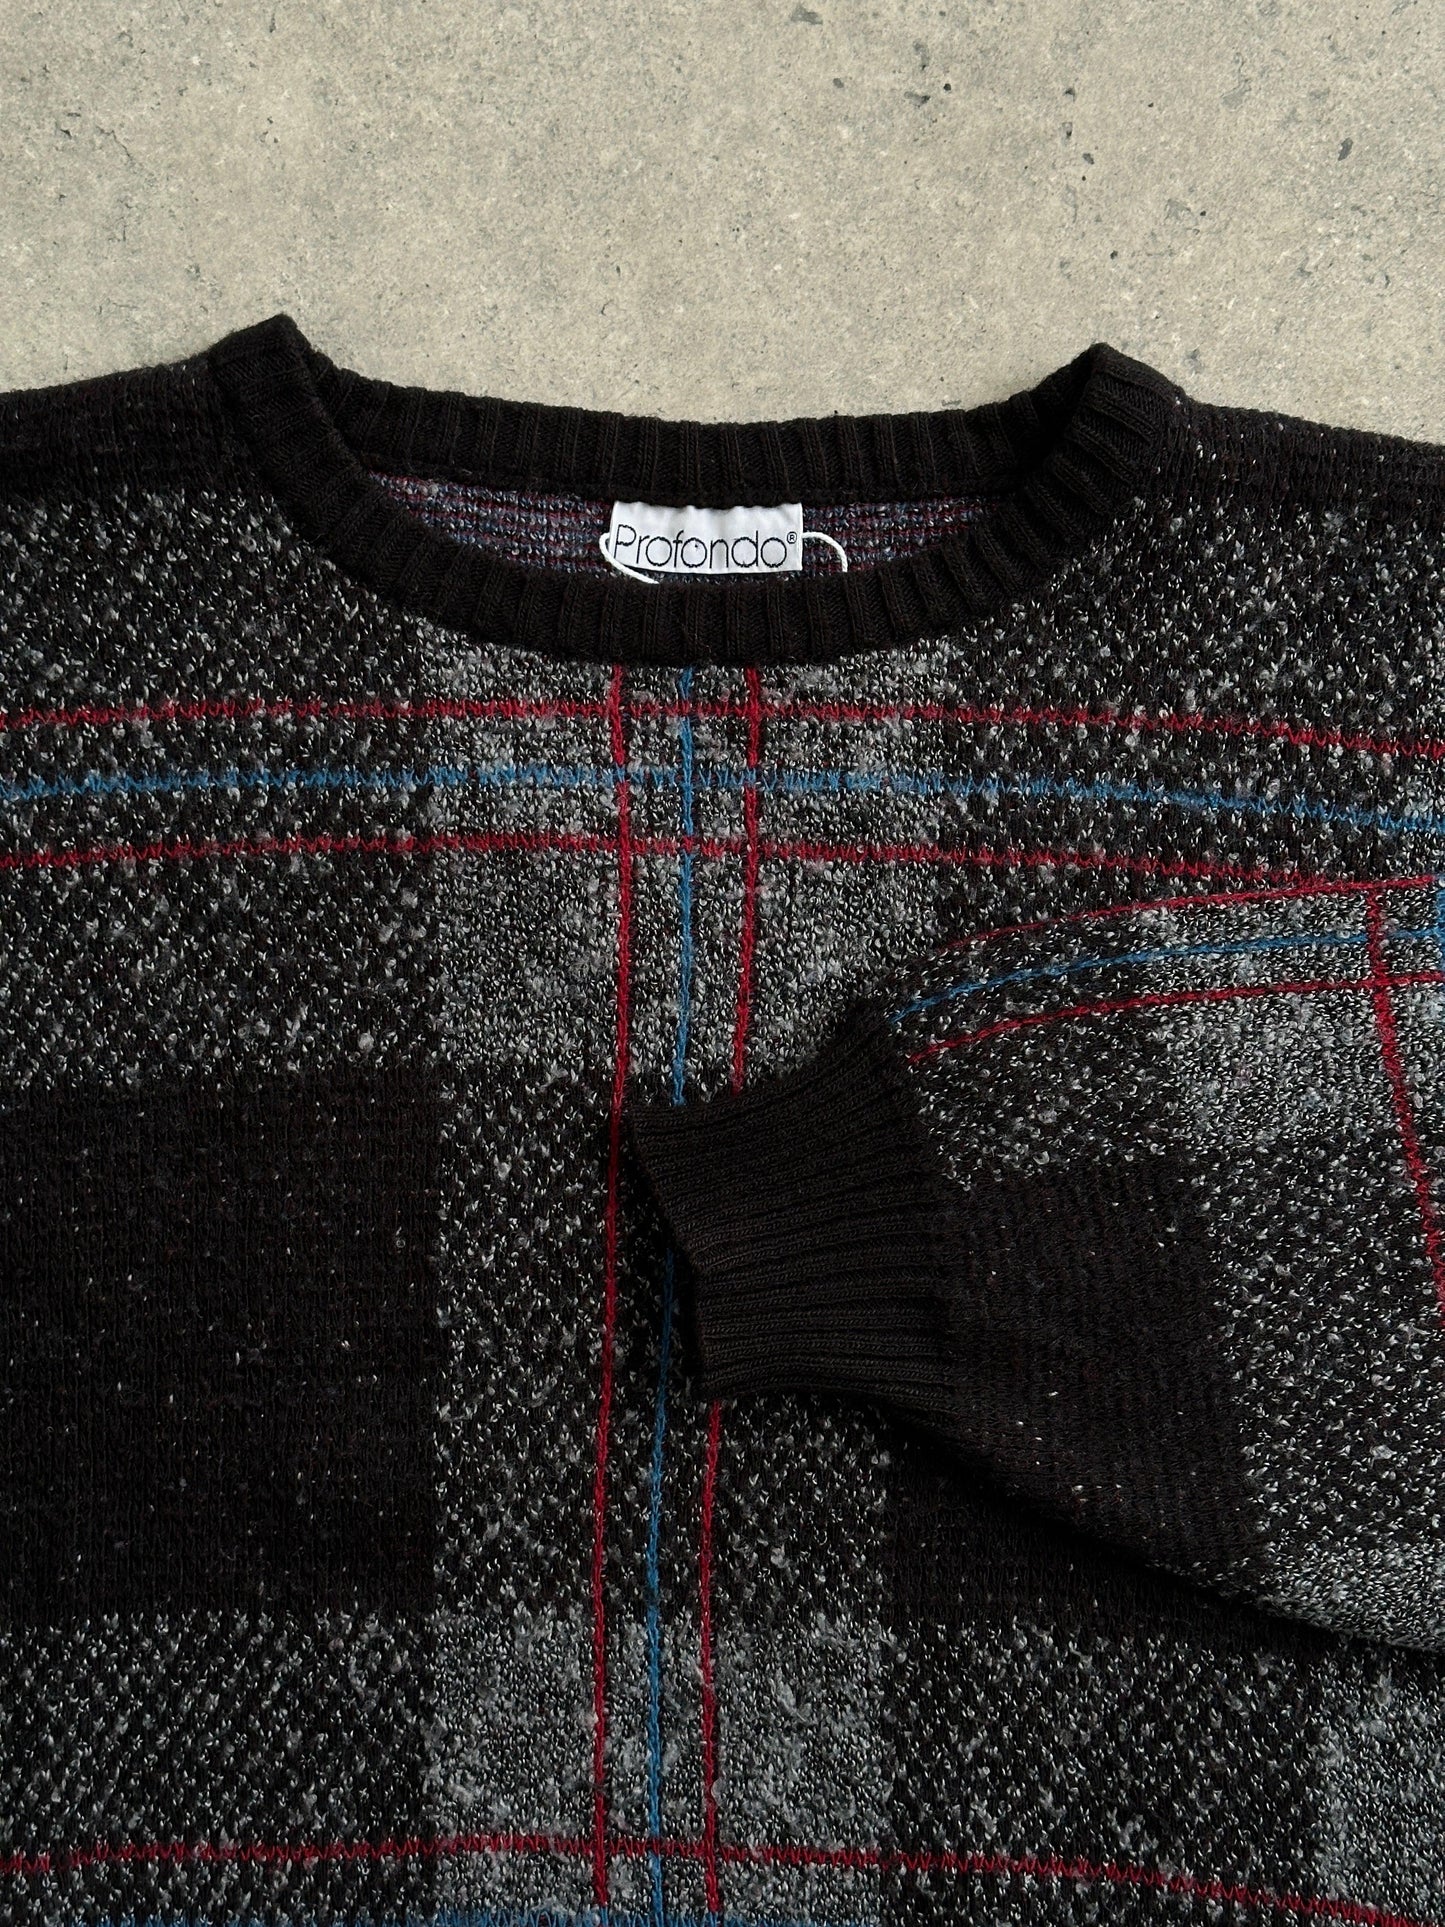 Vintage Lambswool Check Knitted Jumper - M - Known Source